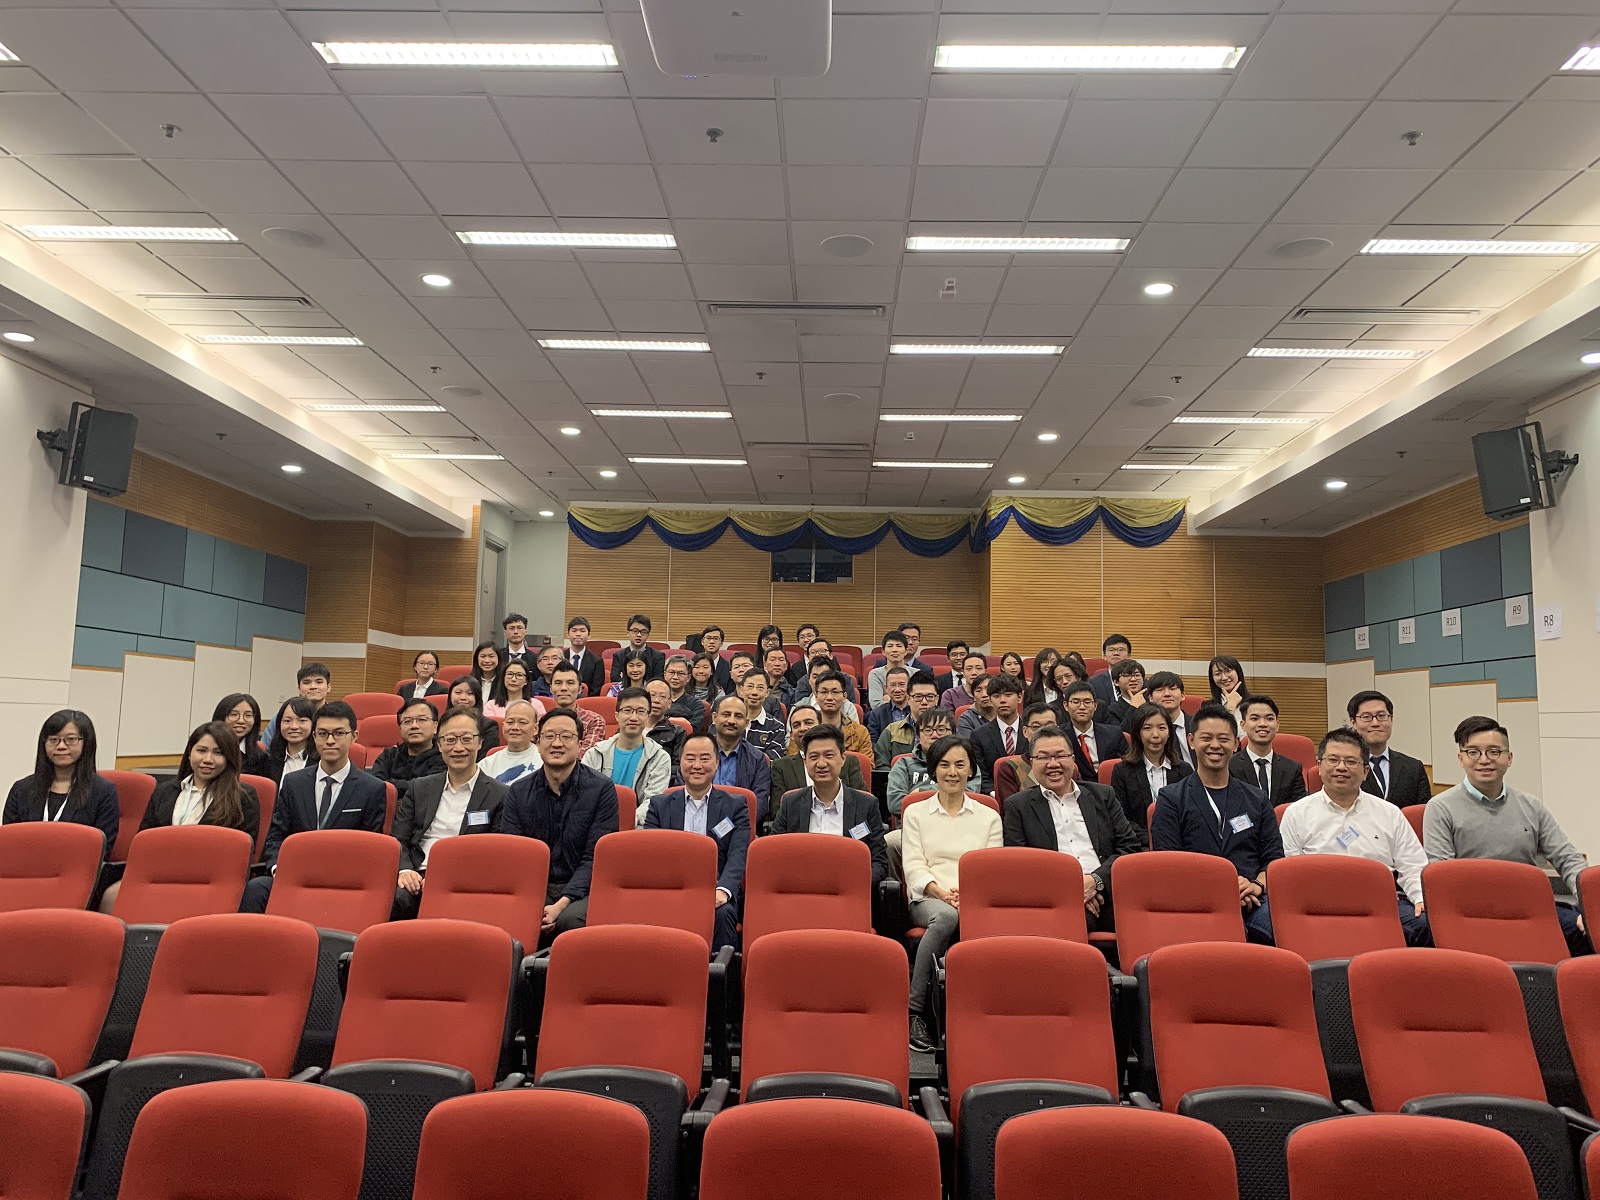 Mr. Tony Wong, Assistant Government Chief Information Officer (Industry Development) at the “ISACA Student Group Annual Case Competition 2019” with Guests and Students.